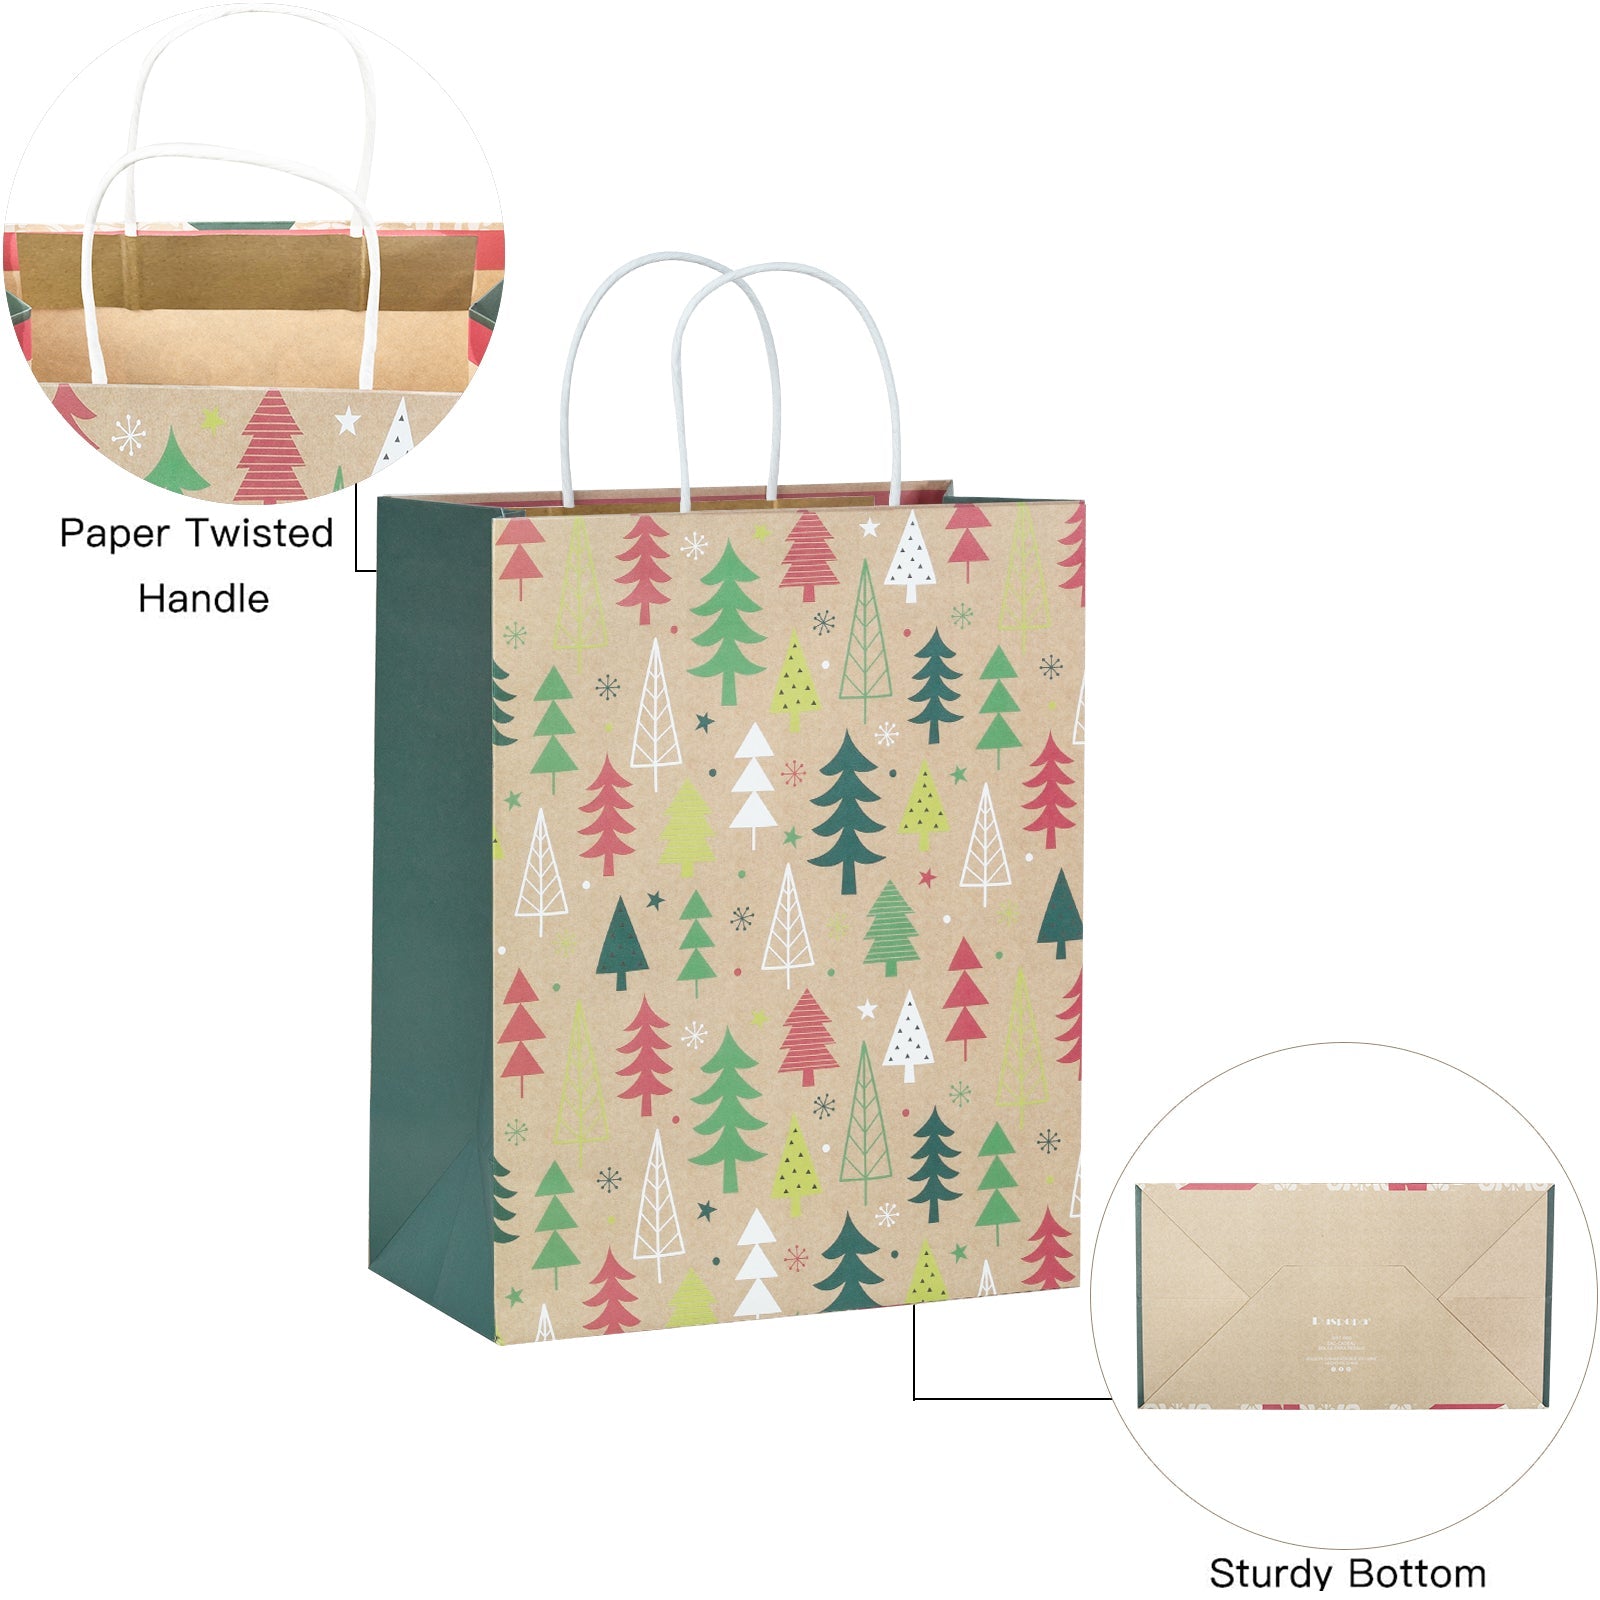 Assort Large Christmas Gift Bags - Santa Claus/ Pine Trees/ Colorful Lights - 9 Pack,10x5x13 inch